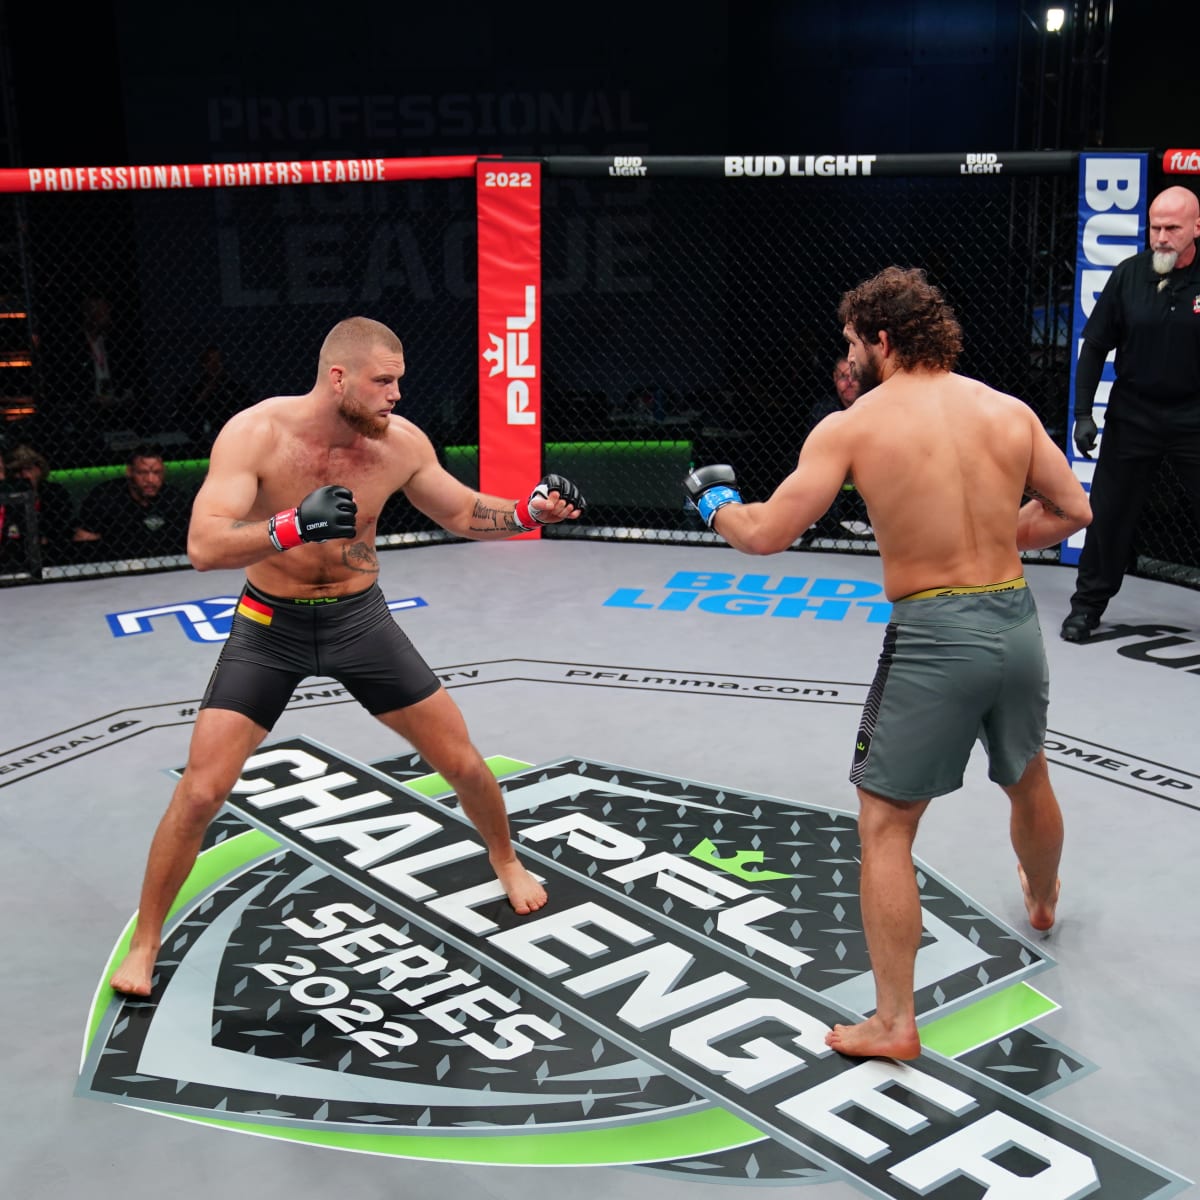 Professional Fighters League Challenger Series, Week 2 Live Stream Watch Online, TV Channel Start Time - How to Watch and Stream Major League and College Sports